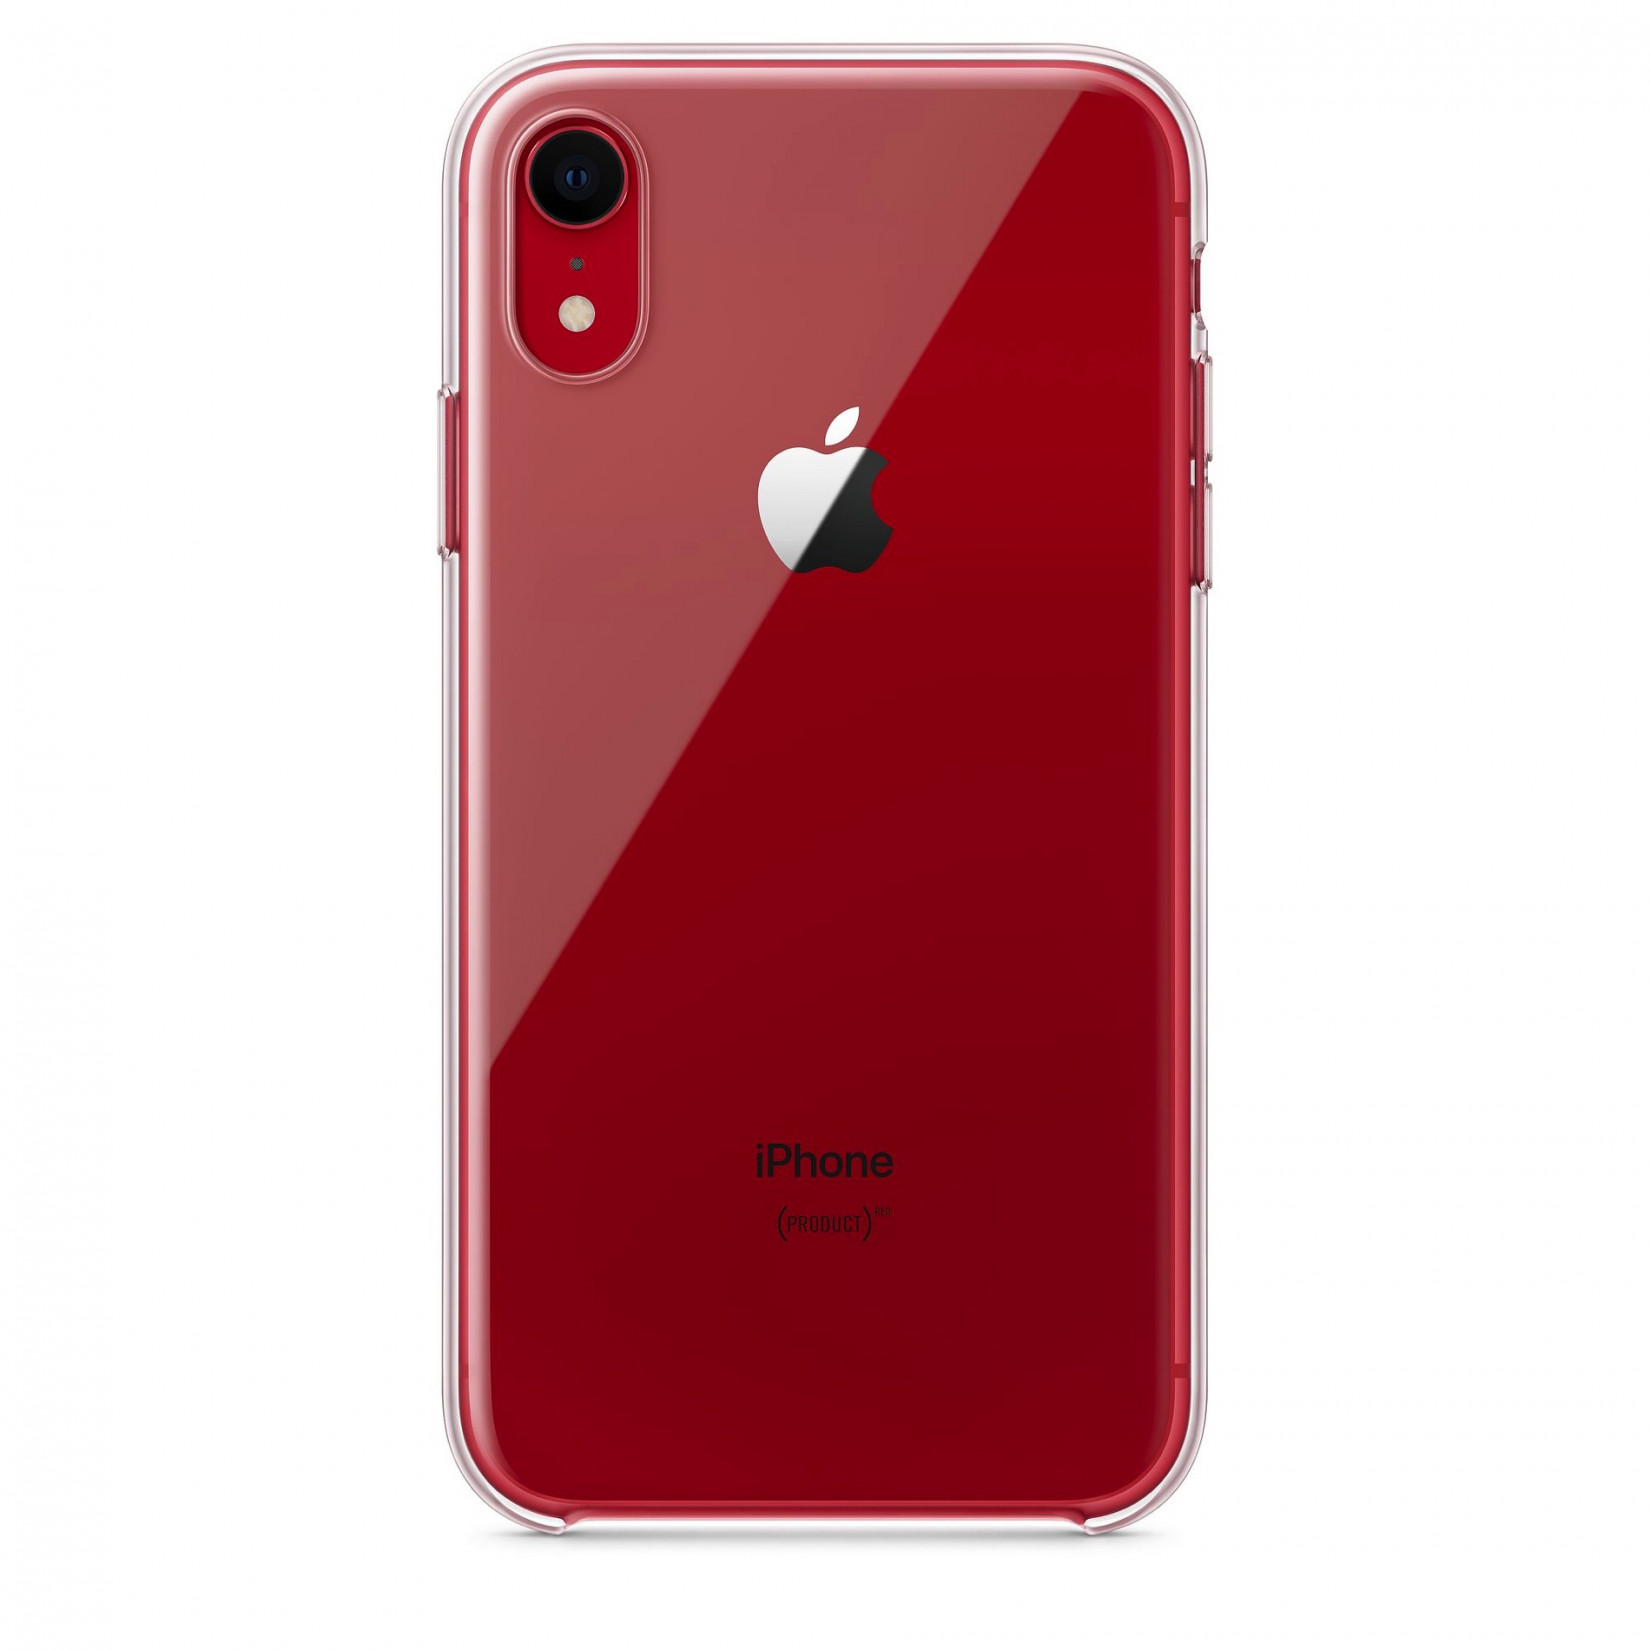 Apple Xr Case India : Premium Leather Card Slot Back Cover Case for